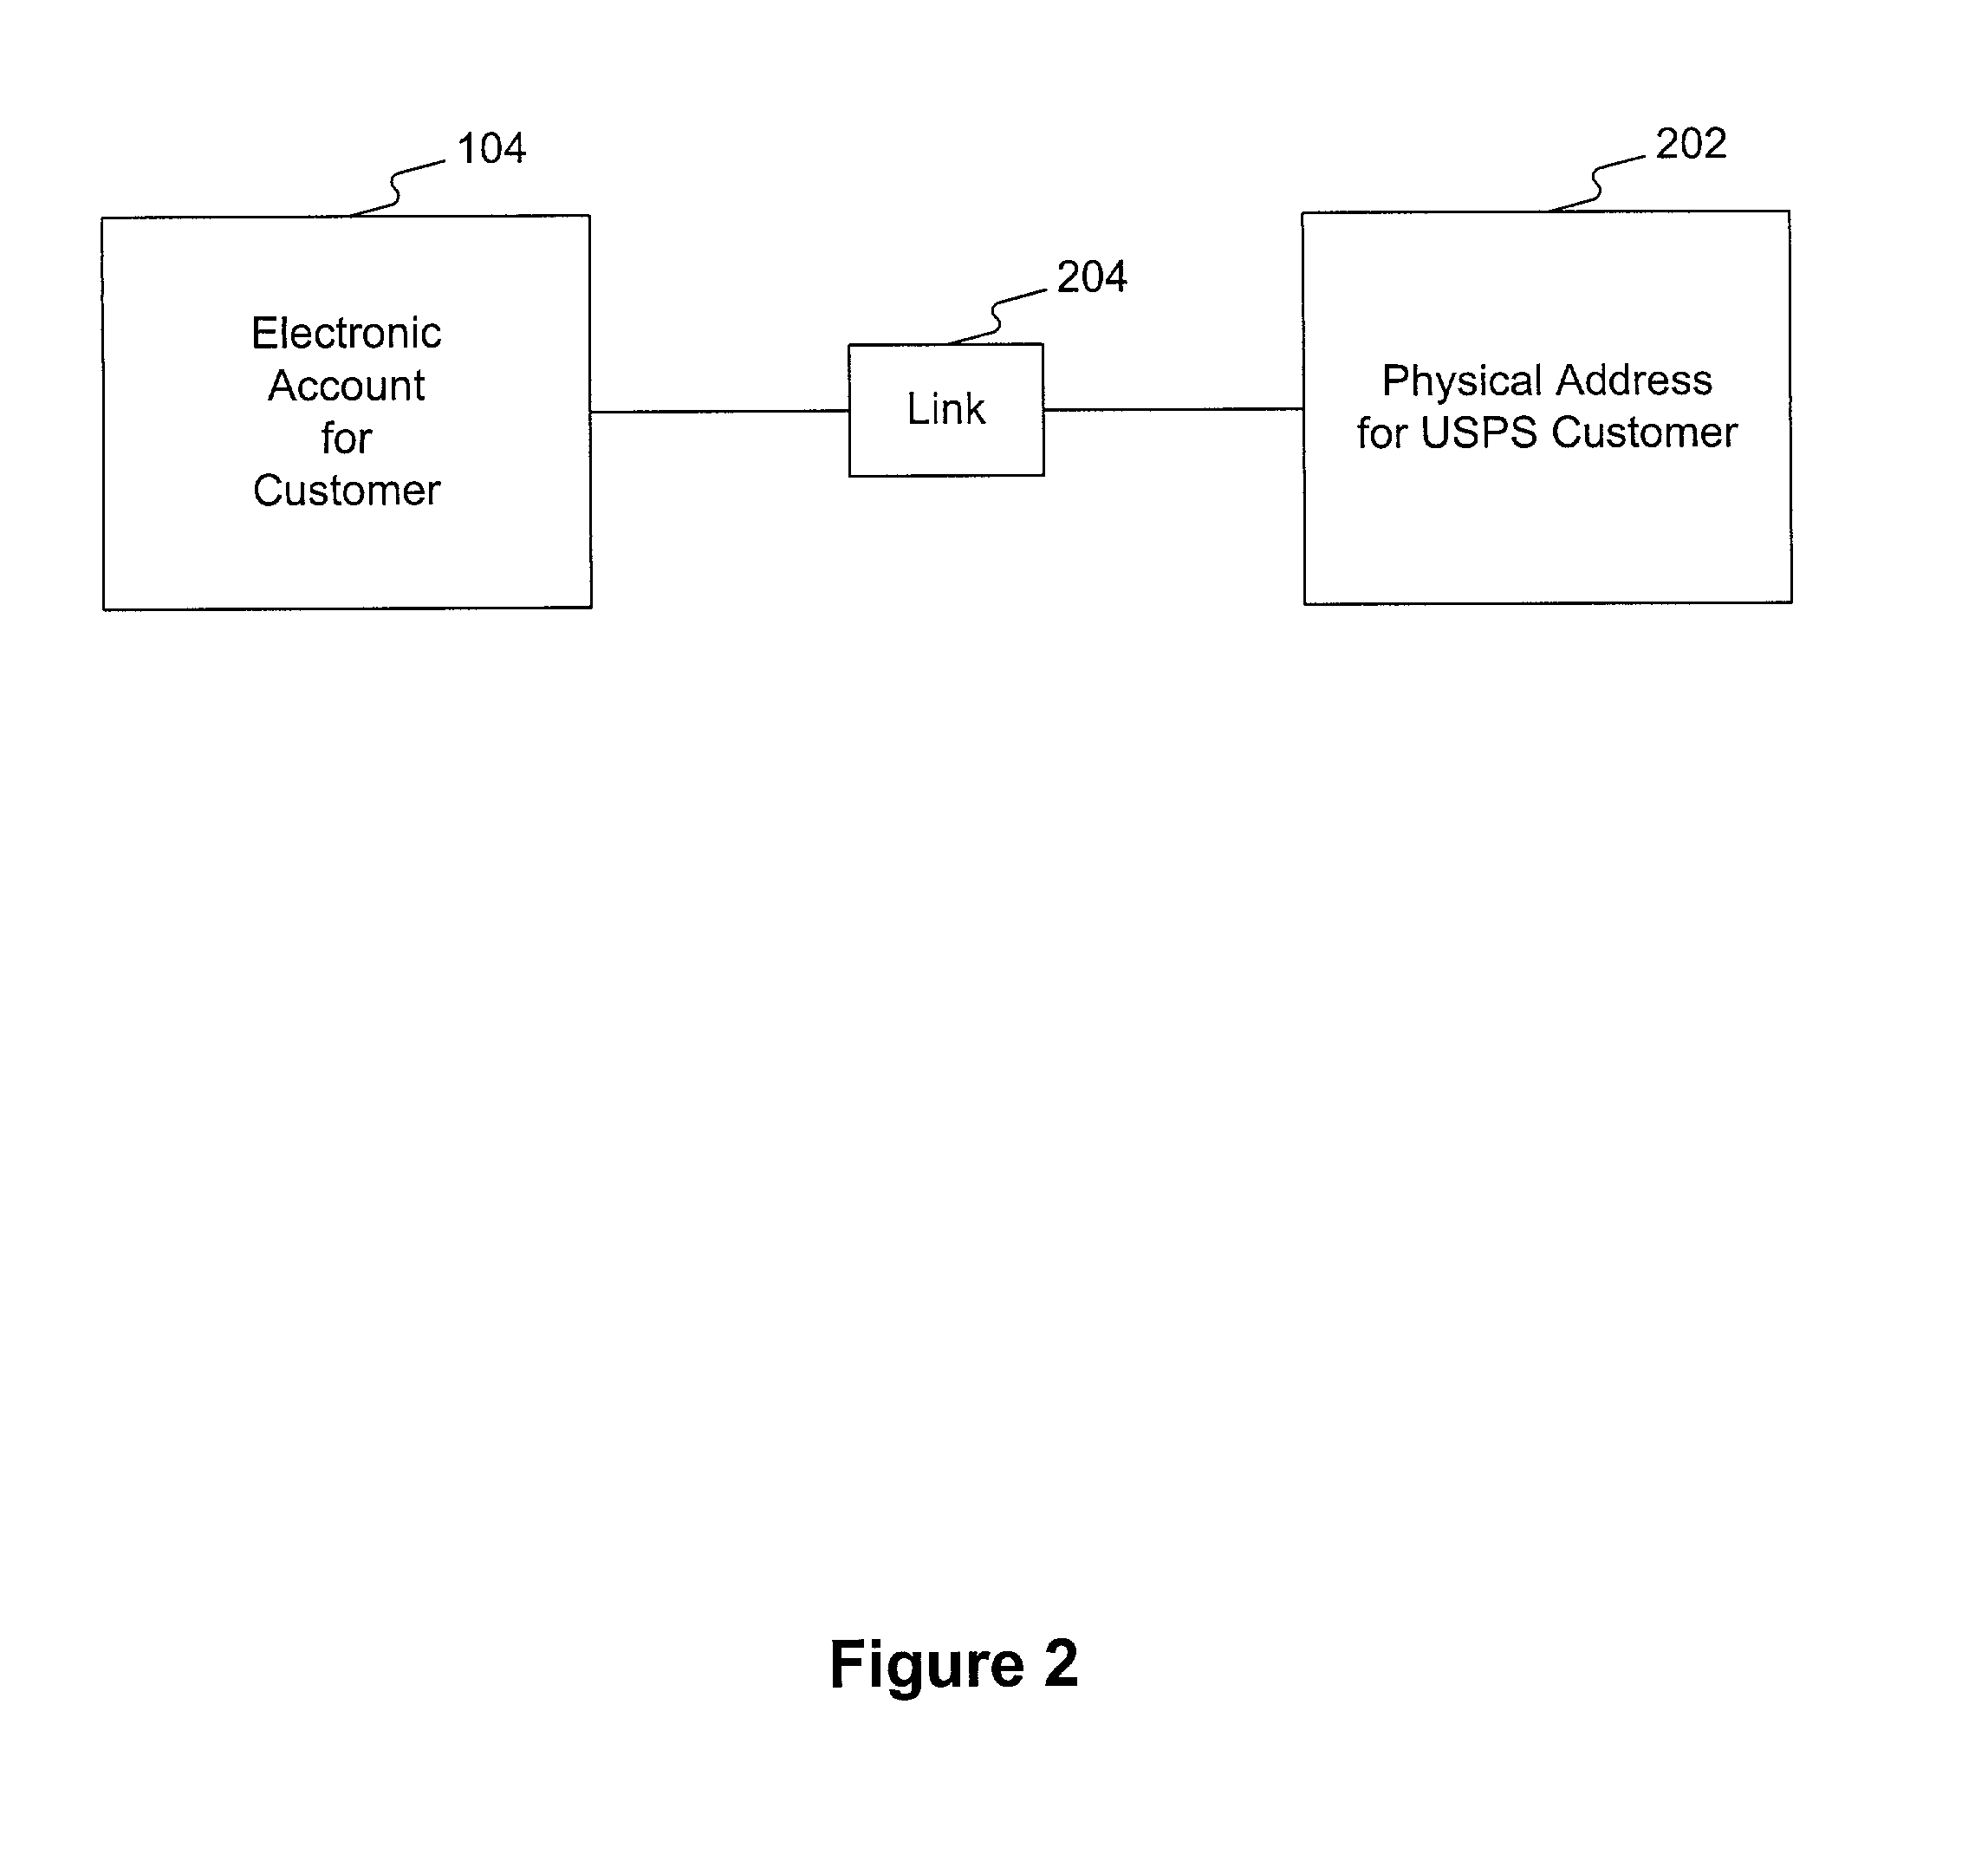 Methods and systems for establishing an electronic account for a customer